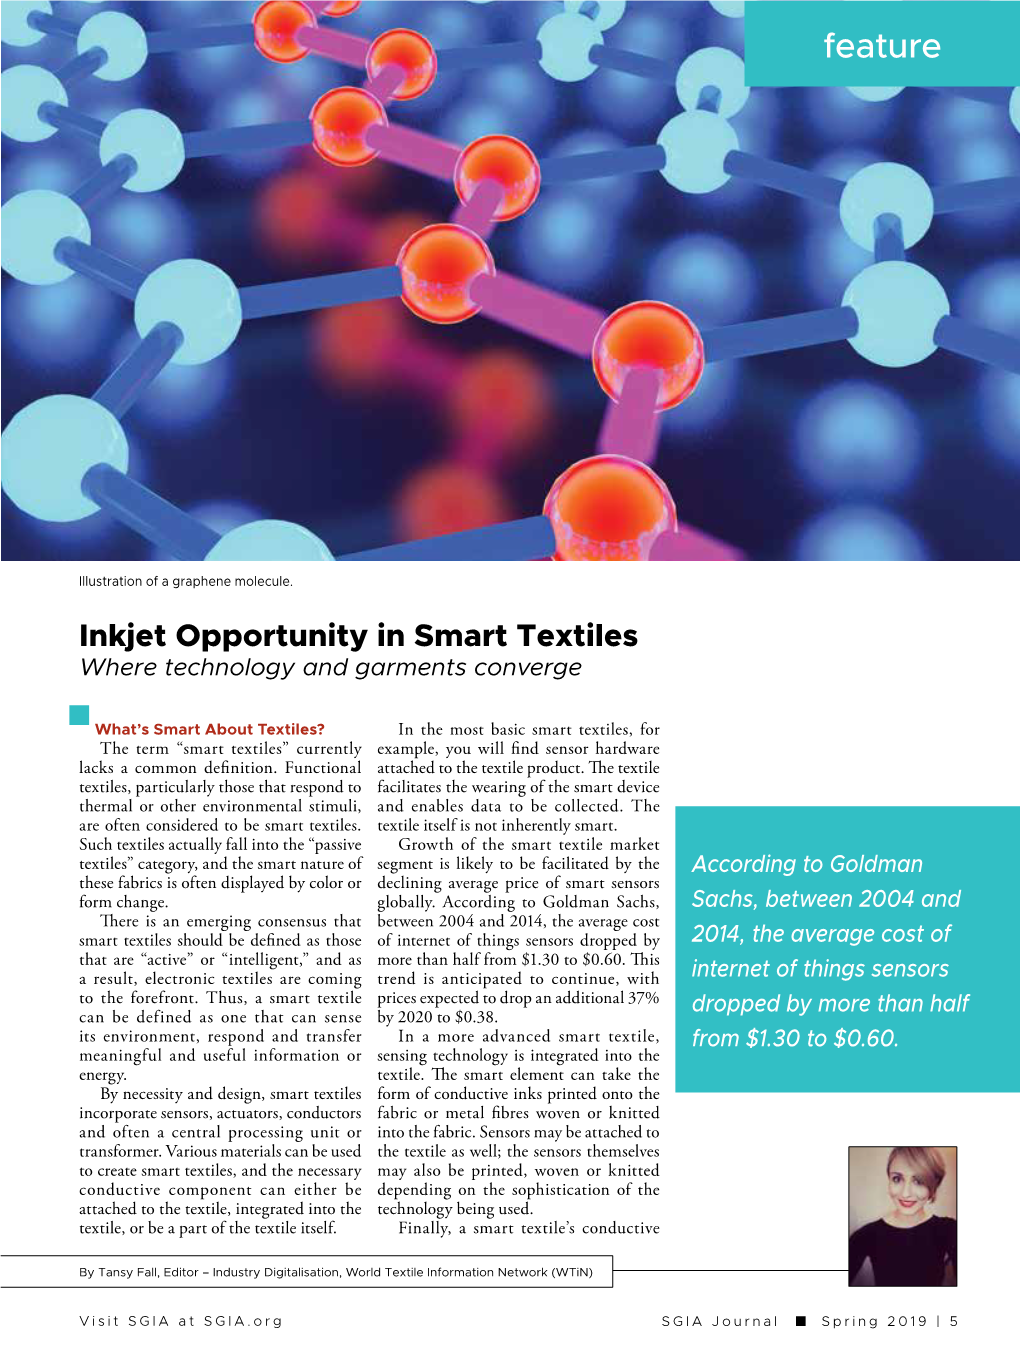 Inkjet Opportunity in Smart Textiles Where Technology and Garments Converge